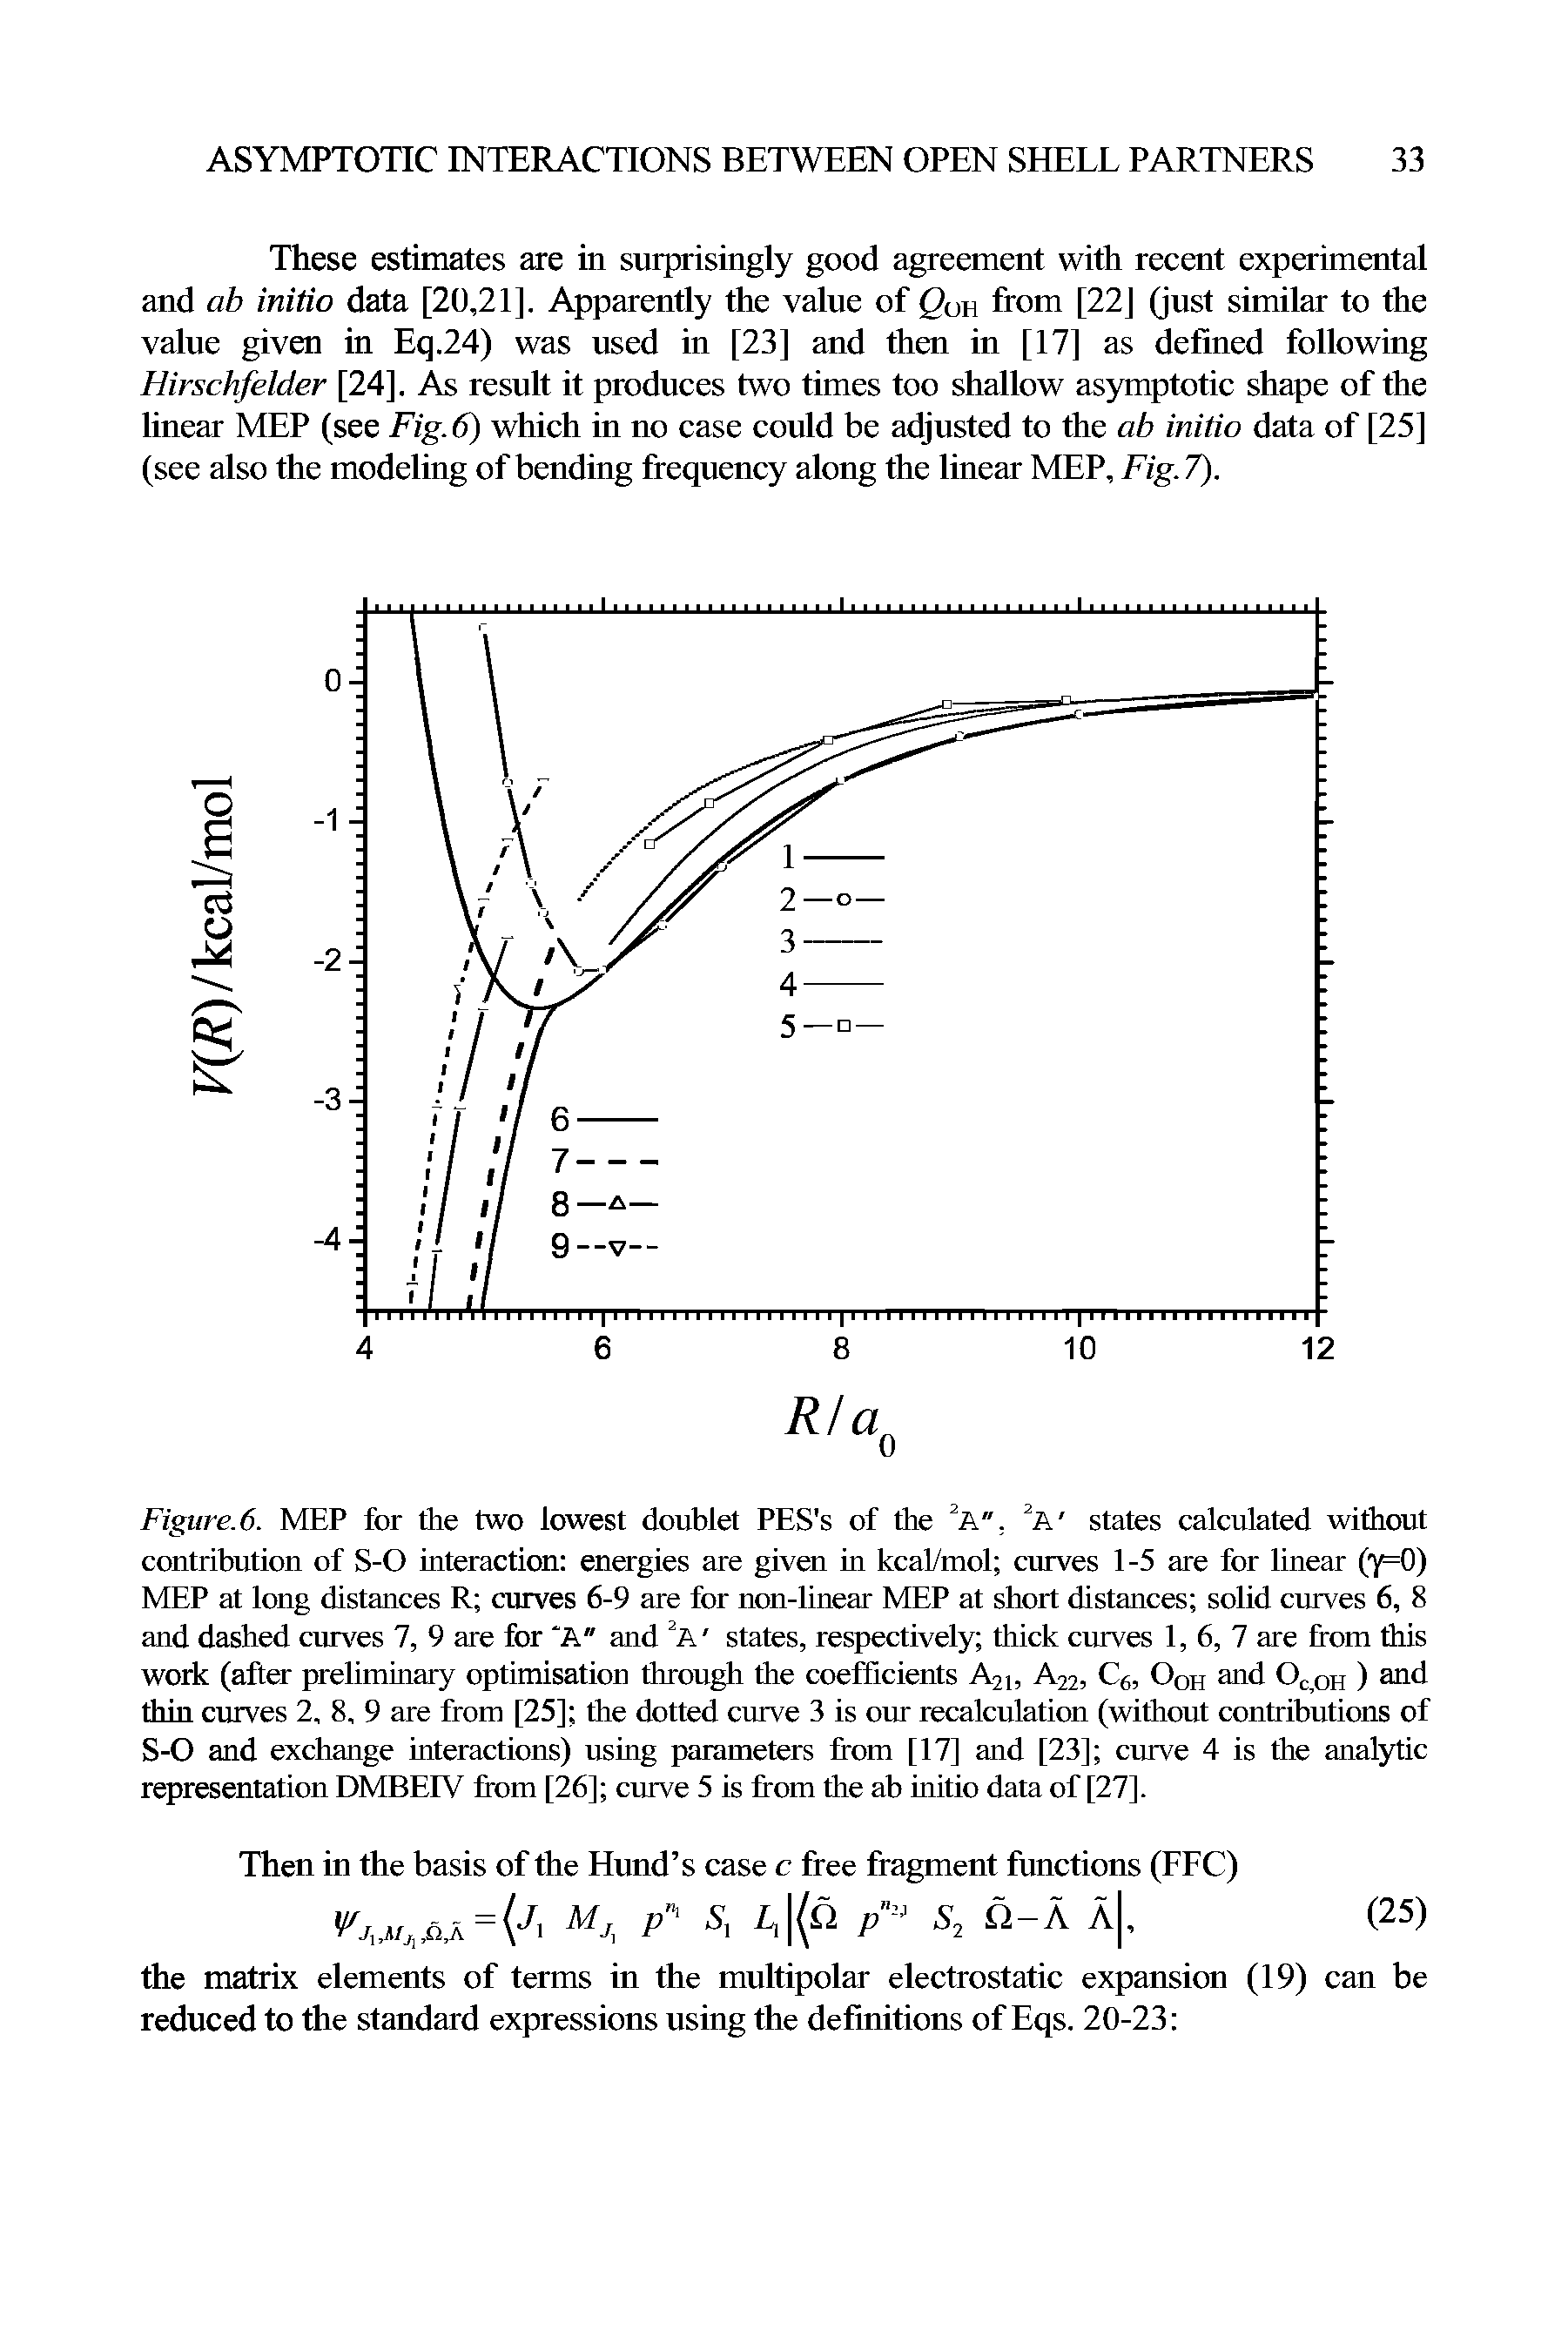 Figure. 6. MEP for the two lowest doublet PES s of the A", A states calculated without contribution of S-O interaction energies are given in kcal/mol curves 1-5 are for linear (Y=0) MEP at long distances R curves 6-9 are for non-linear MEP at short distances solid curves 6, 8 and dashed curv es 7, 9 are for "A" and A states, respectively thick curves 1, 6, 7 are from this work (after preliminary optimisation through the coefficients A21, A22, Cg, Oqh and Oc oh ) and thin curves 2, 8, 9 are from [25] the dotted curve 3 is our recalculation (without contributions of S-O and exchange interactions) using parameters from [17] and [23] curve 4 is the analytic representation DMBEfV from [26] curve 5 is from the ab initio data of [27],...